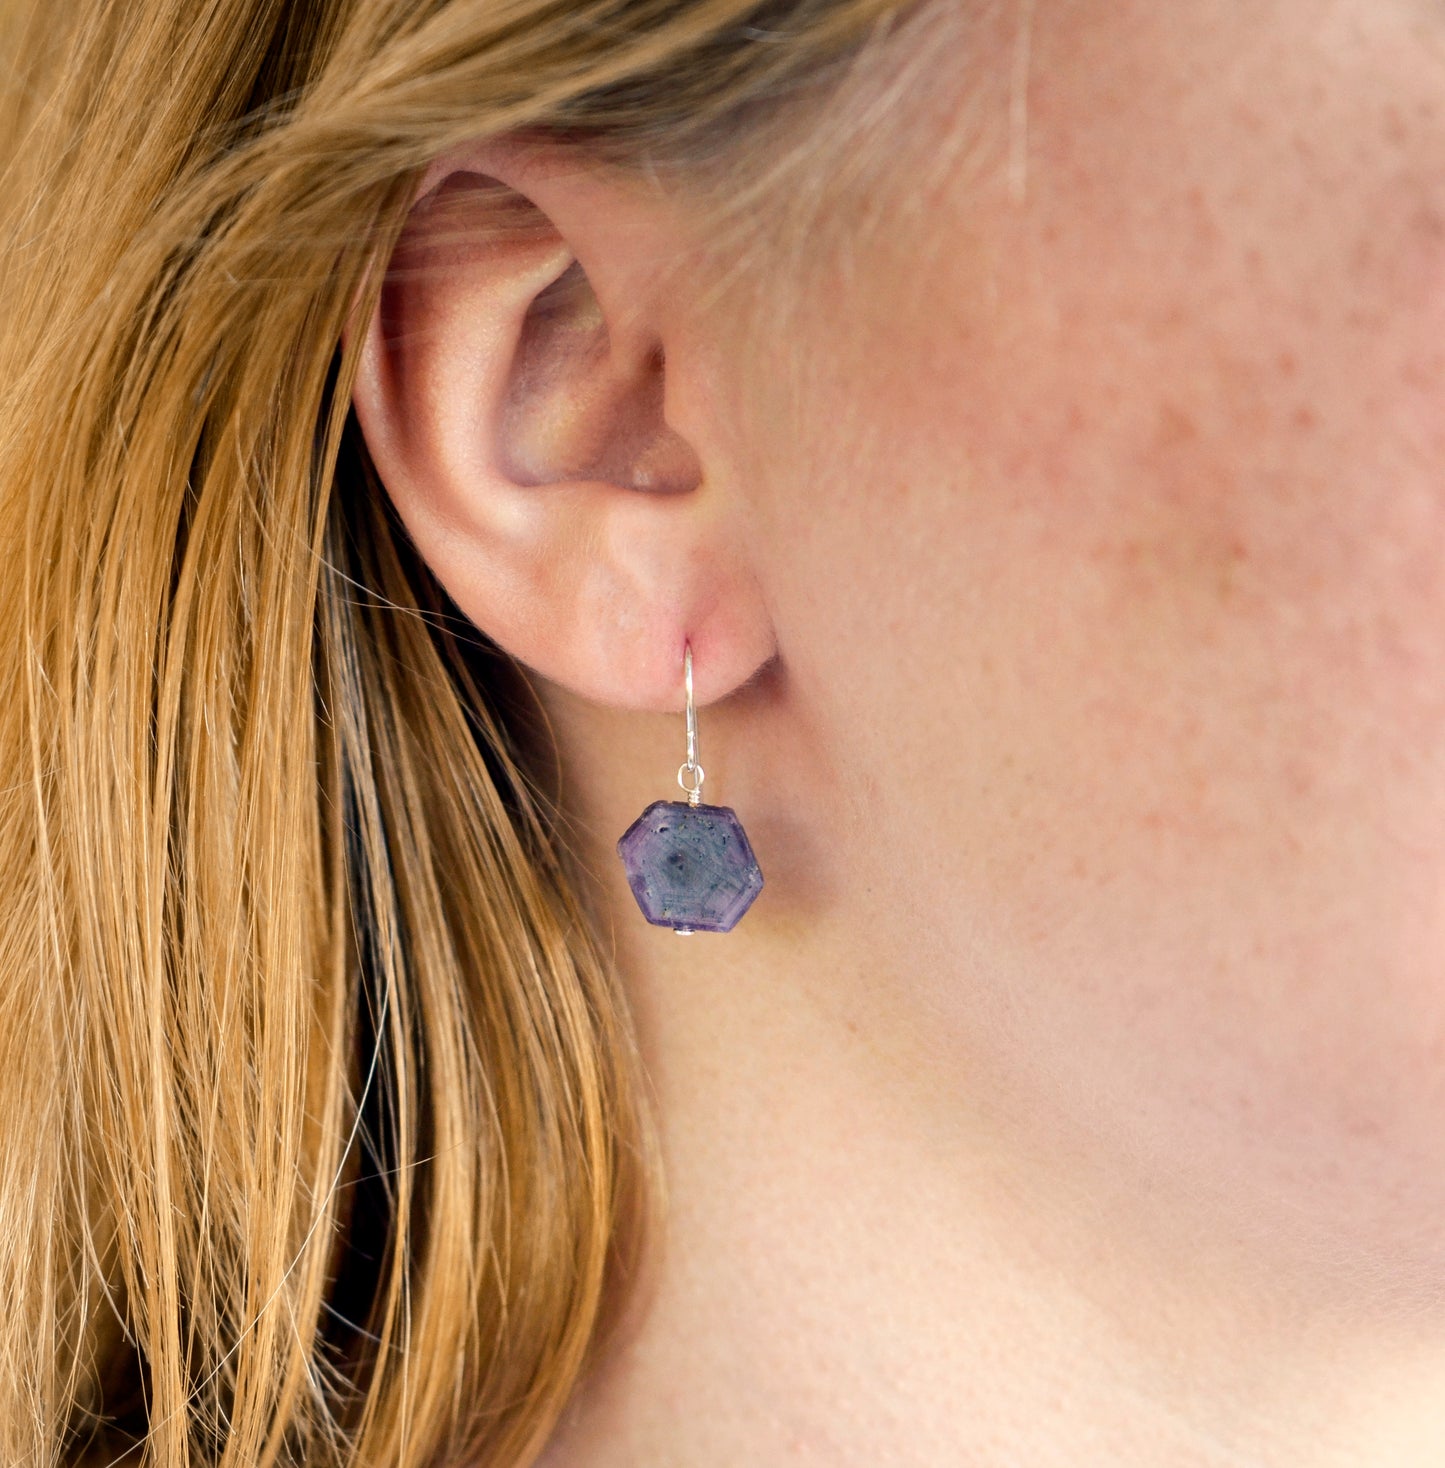 Purple-pink raw ruby stones suspended from sterling silver earwires. The stones are rough and in their natural hexagonal shape. Modeled image.